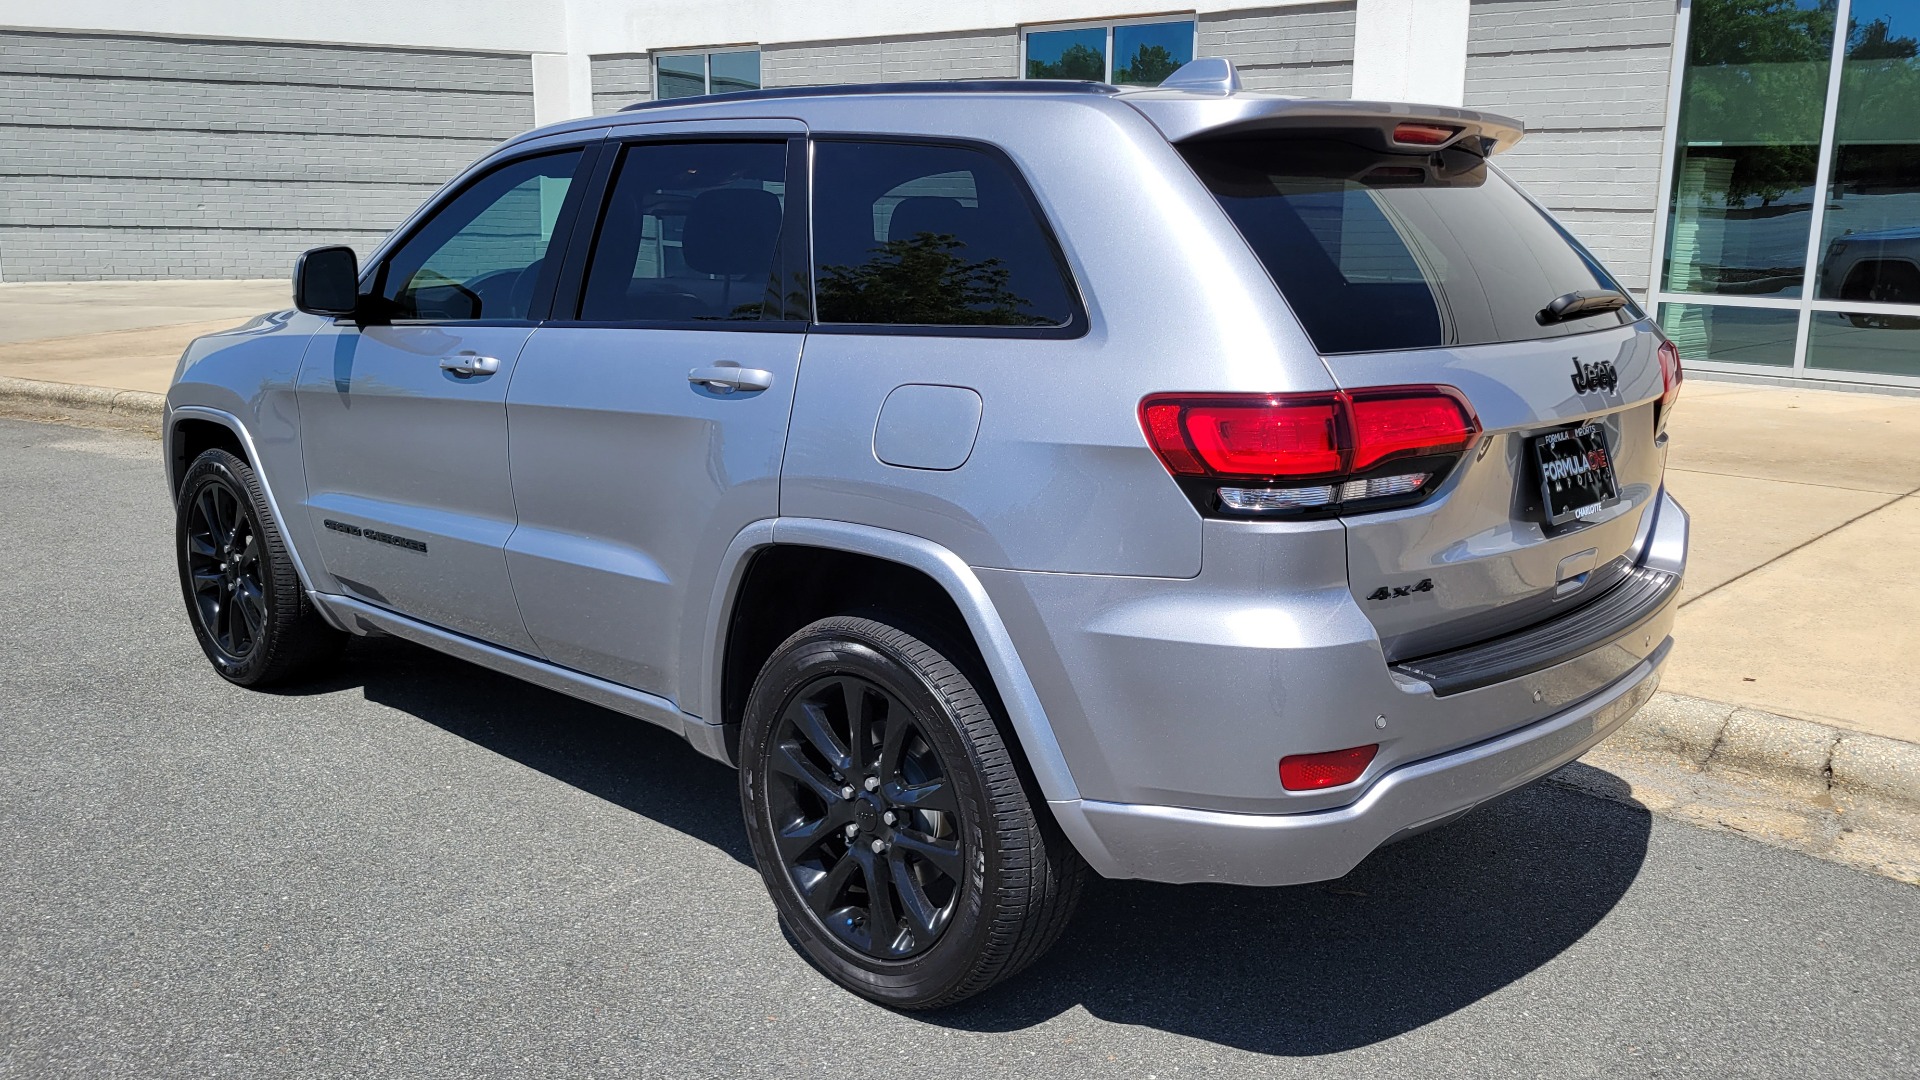 Used 2021 Jeep GRAND CHEROKEE LAREDO X / 3.6L / 4X4 / NAV / ALTITUDE PKG / LEATHER / REARVIEW for sale $37,995 at Formula Imports in Charlotte NC 28227 6